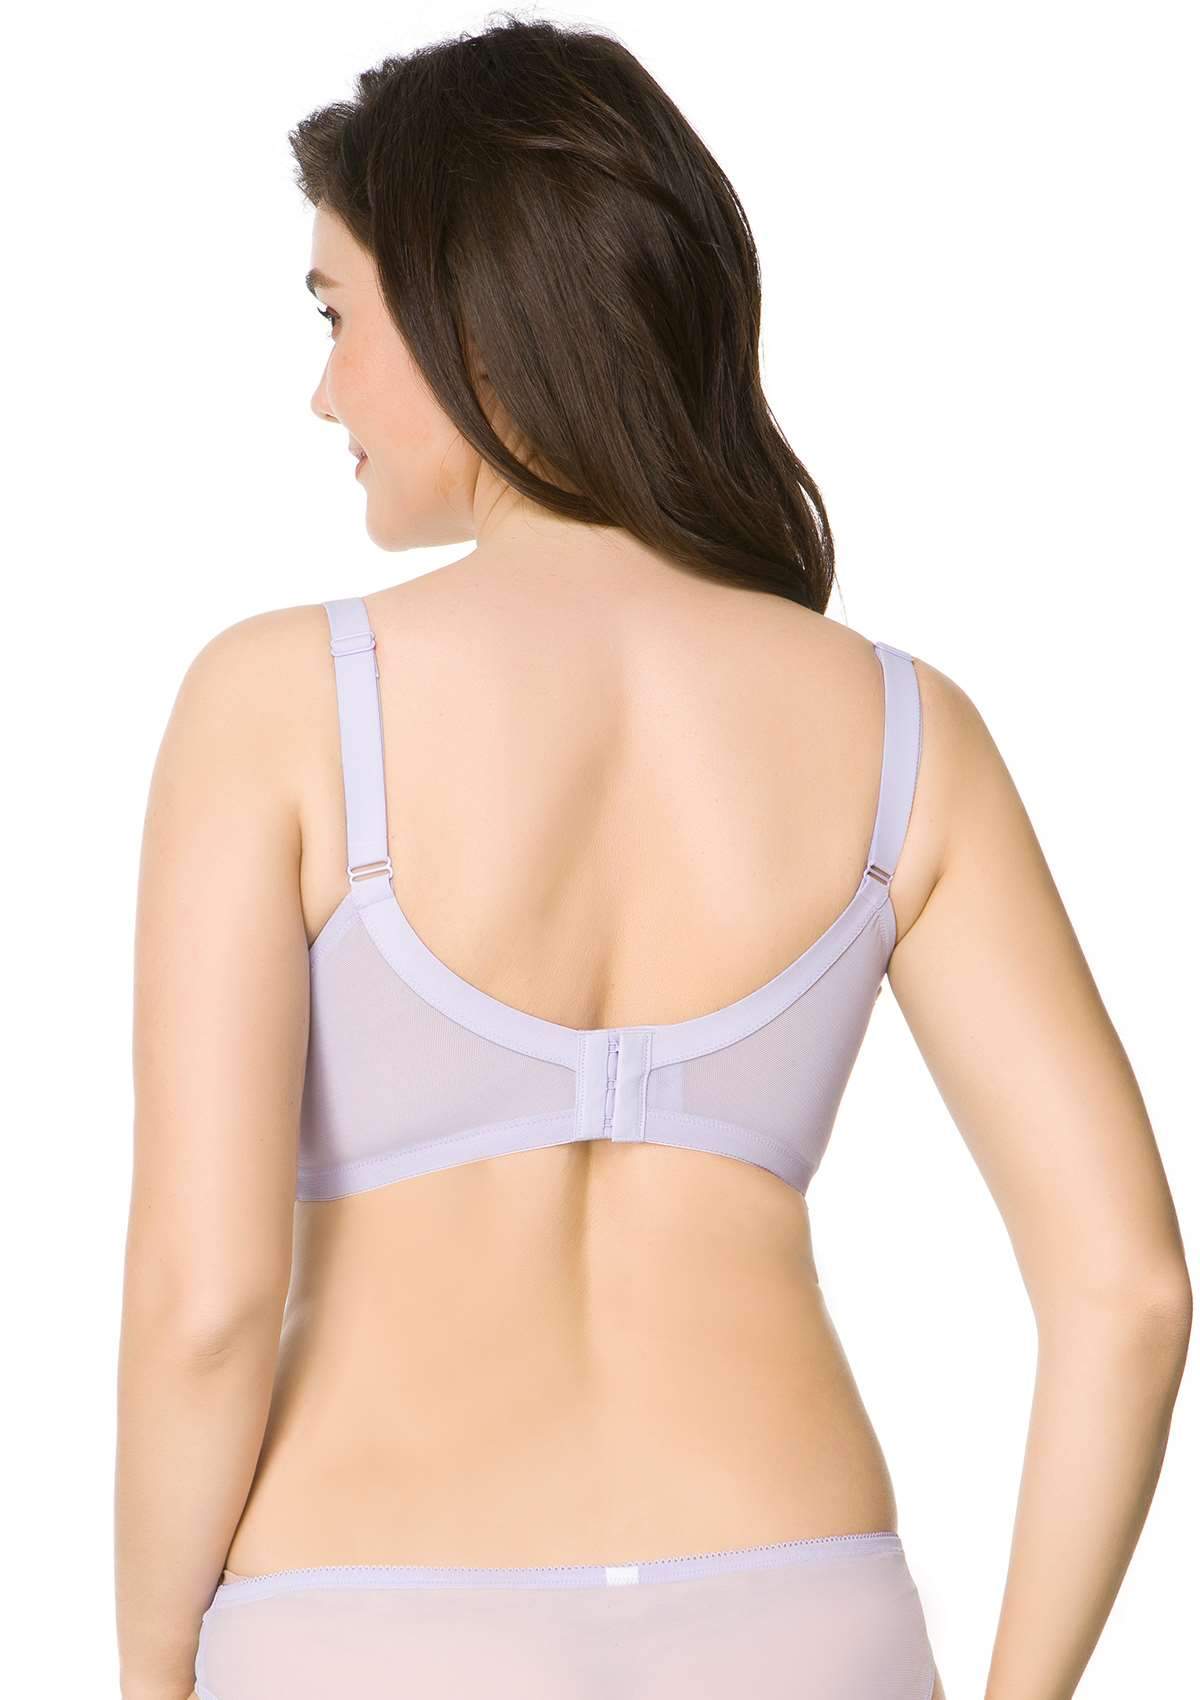 HSIA Wisteria Bra For Lift And Support - Full Coverage Minimizer Bra - Crystal Blue / 38 / D